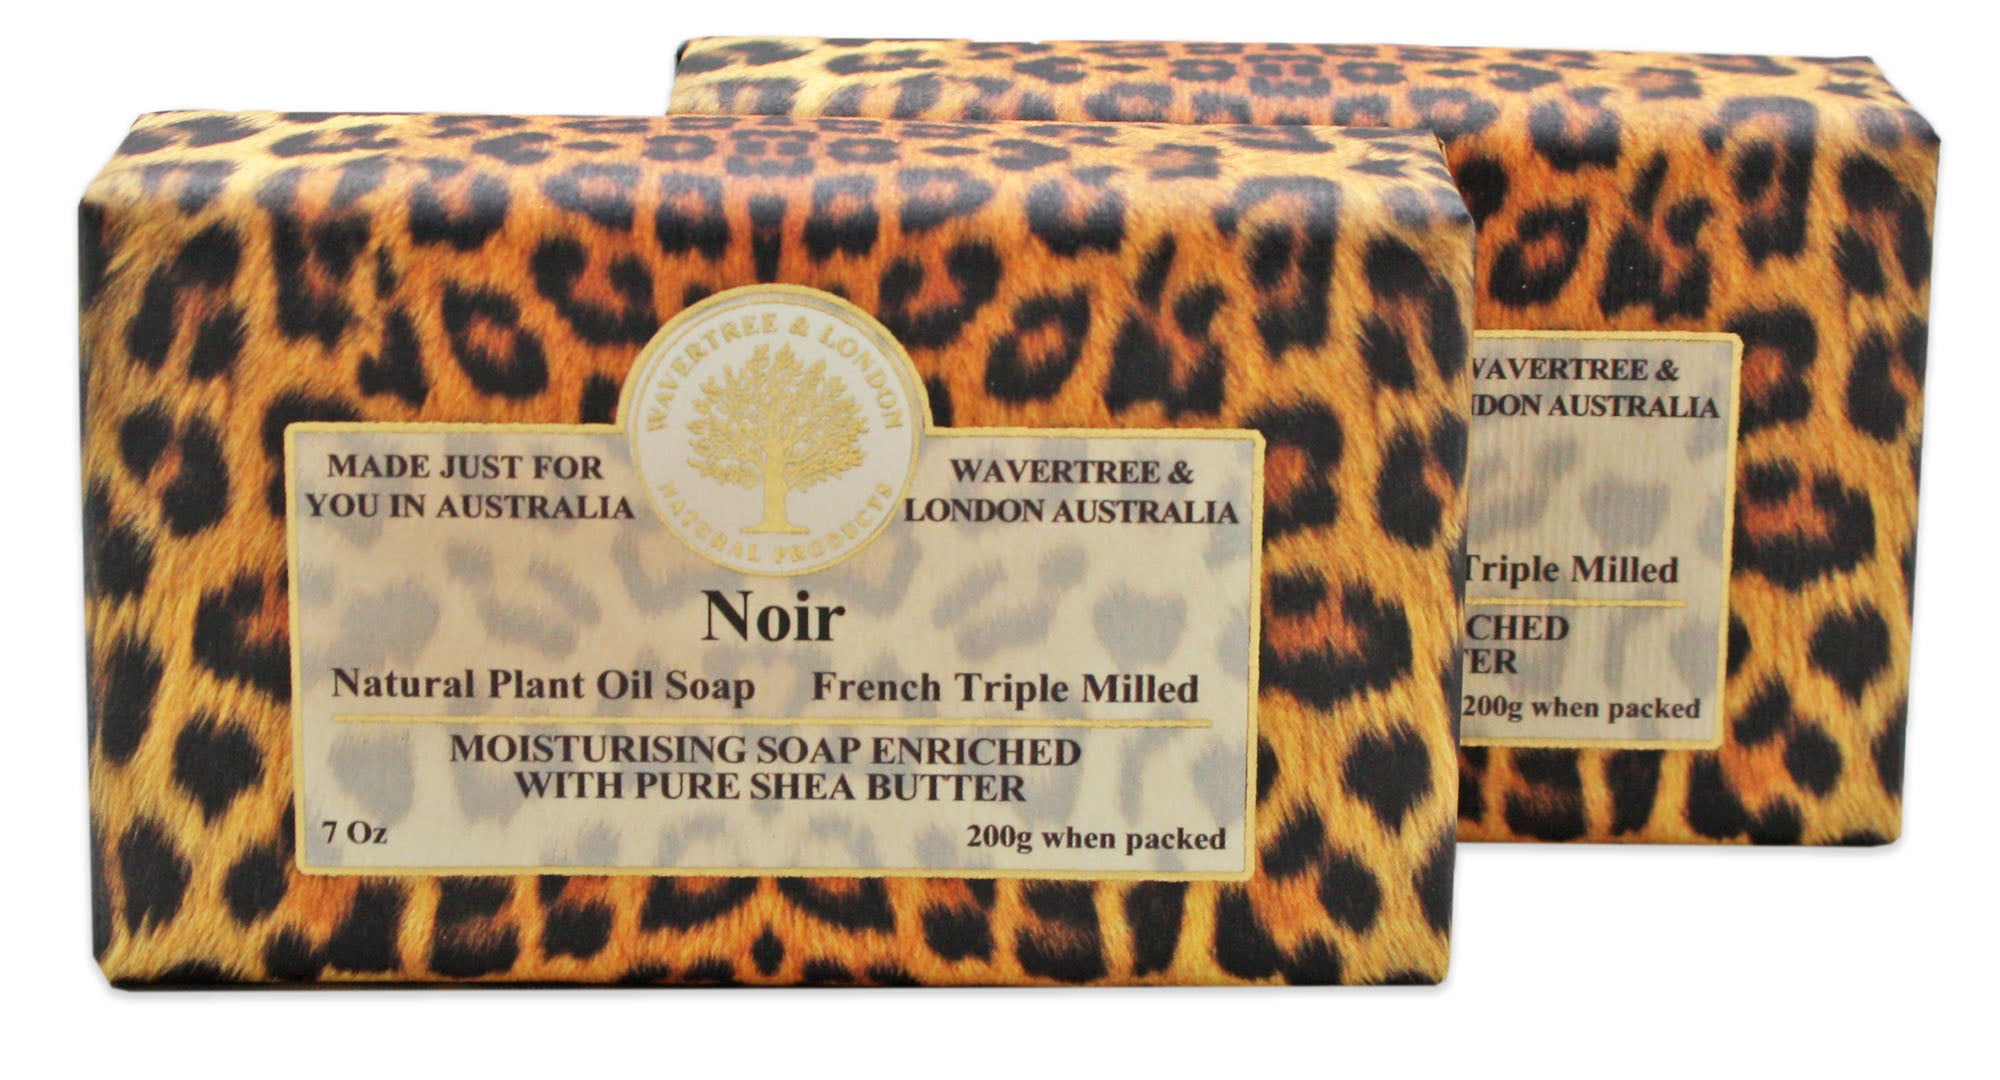 Wavertree & London Noir (2 Bars), 7oz Moisturizing Natural Soap Bar, French -Milled and enriched with Shea Butter